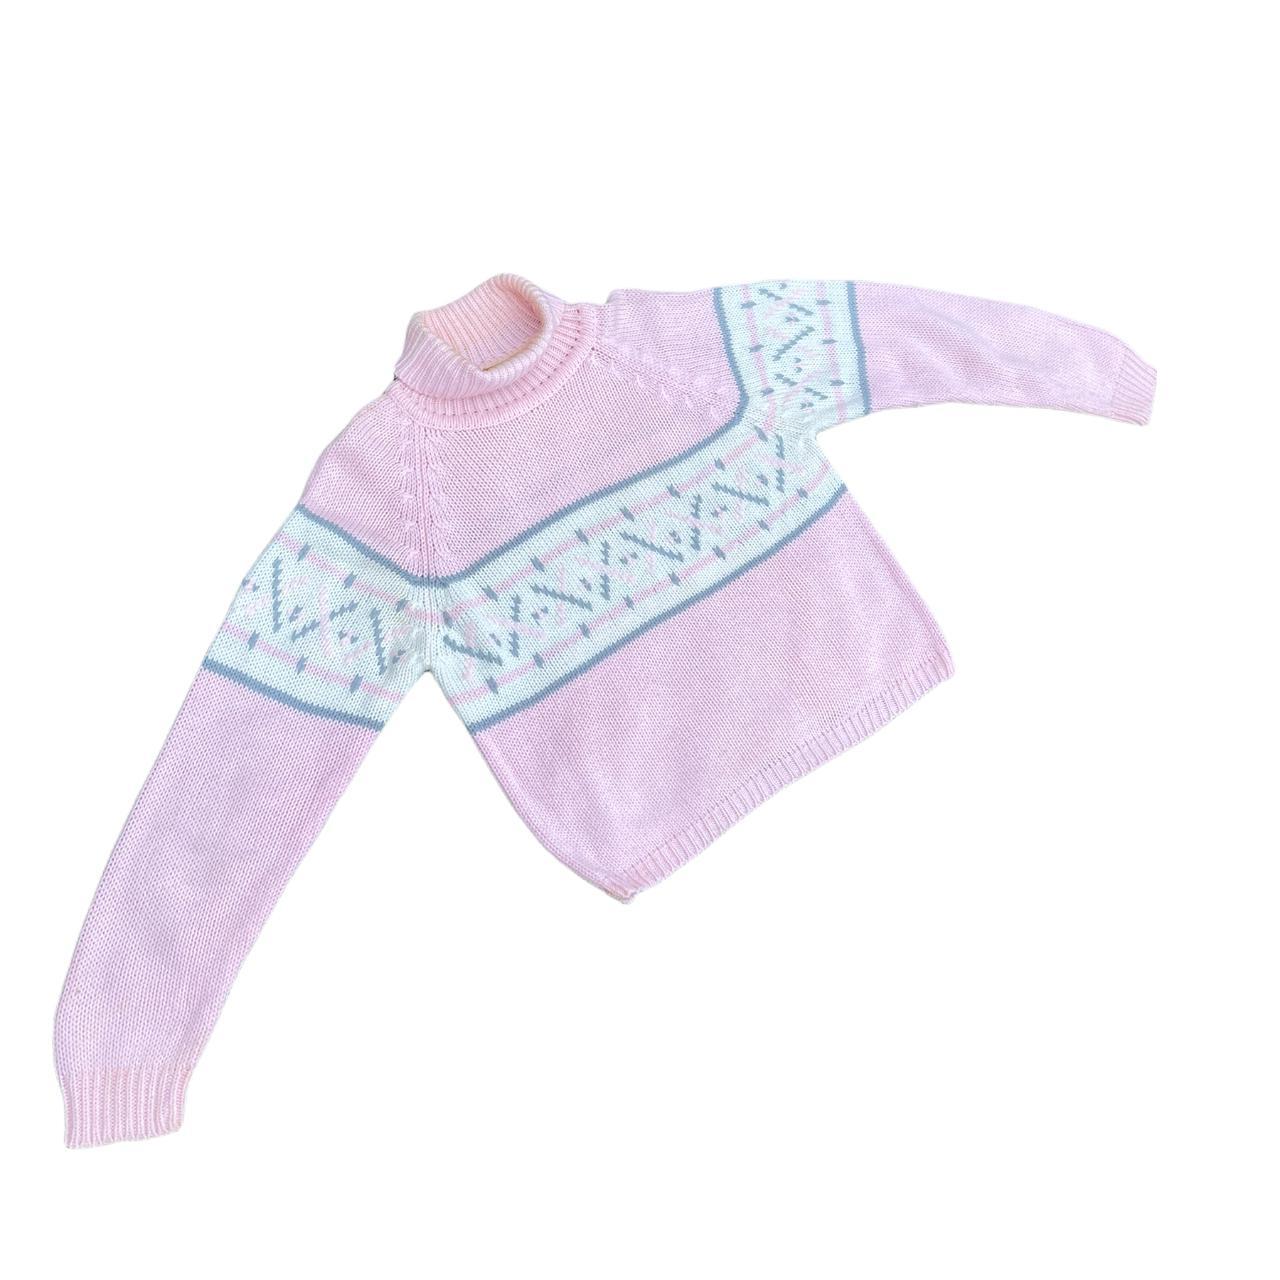 Product Image 1 - Cute Pink Turtleneck Sweater

Pink &